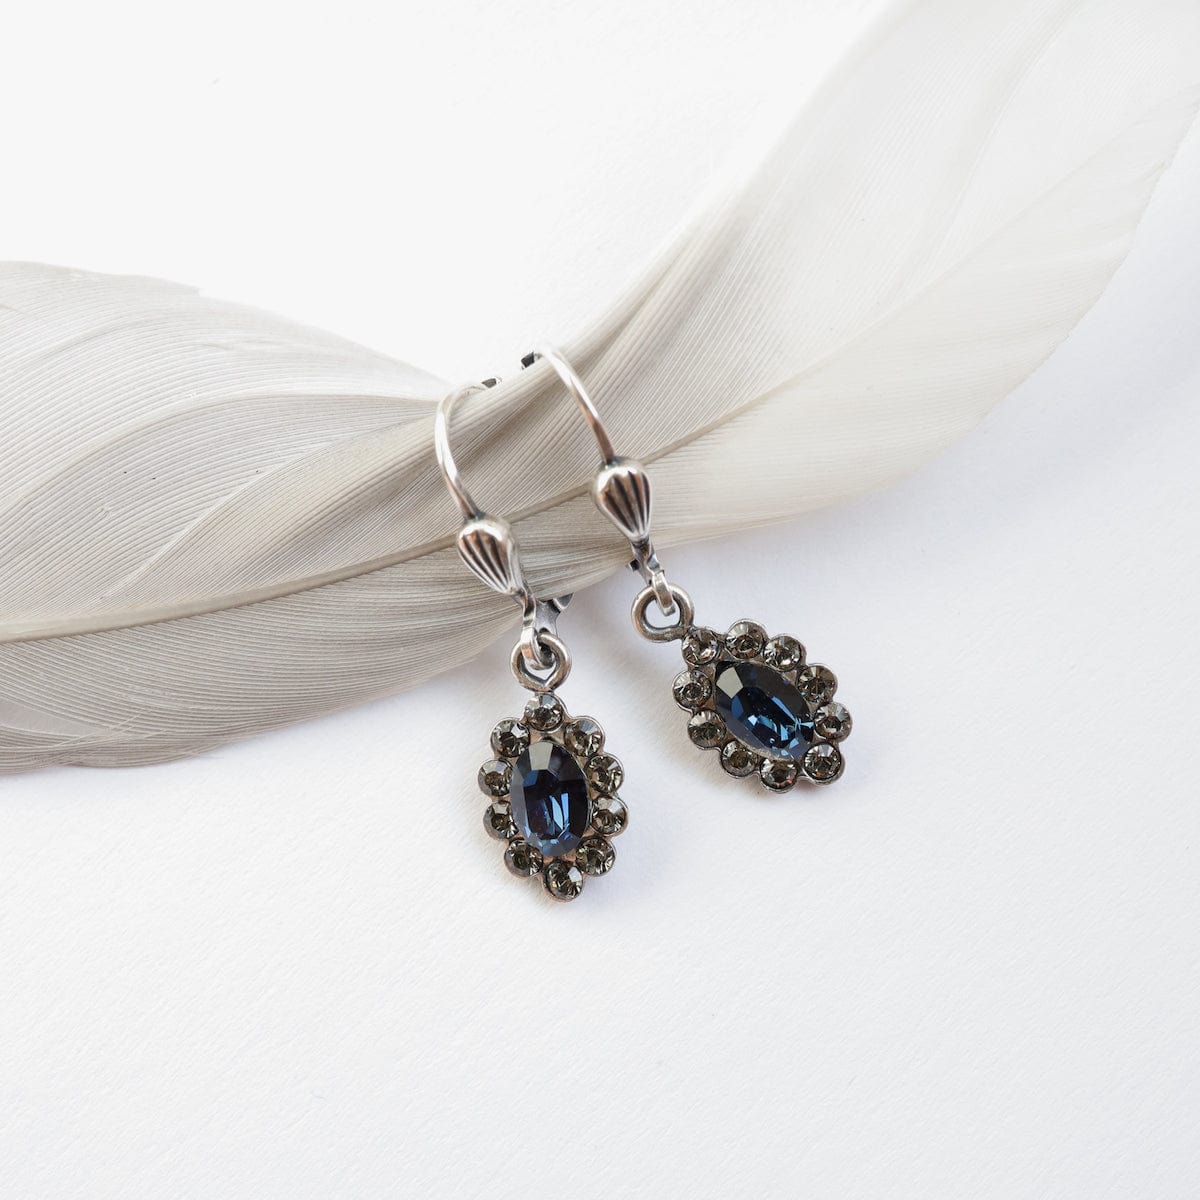 EAR-JM "Old Silver" Small Marquis Midnight Stone Earrings